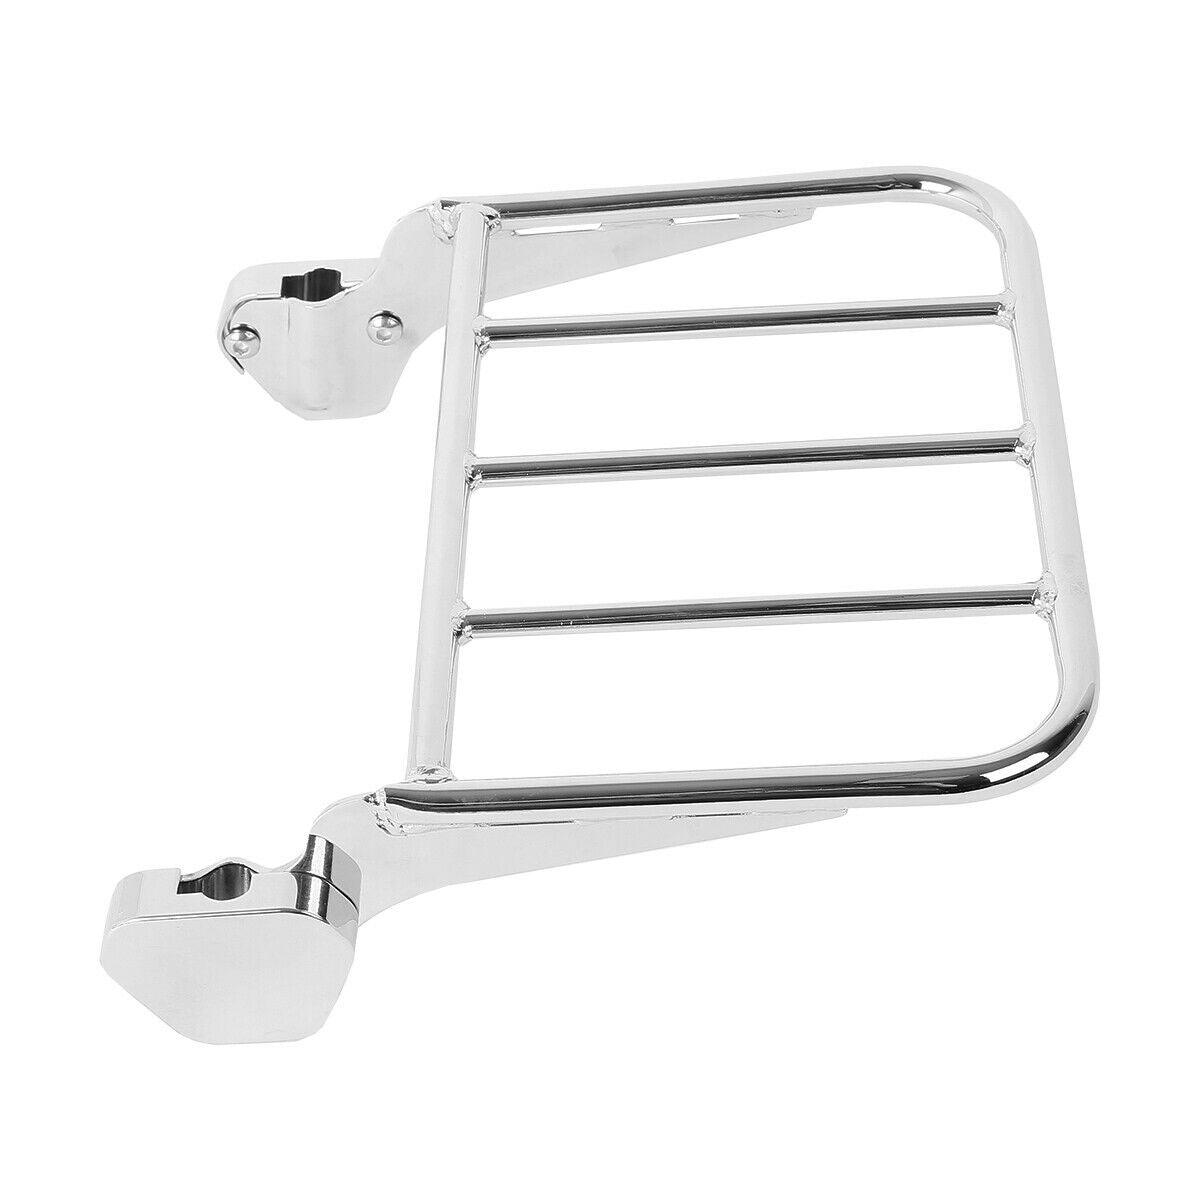 Chrome Luggage Rack Fit For Harley Touring Road King Electra Glide FLHX 1997-08 - Moto Life Products